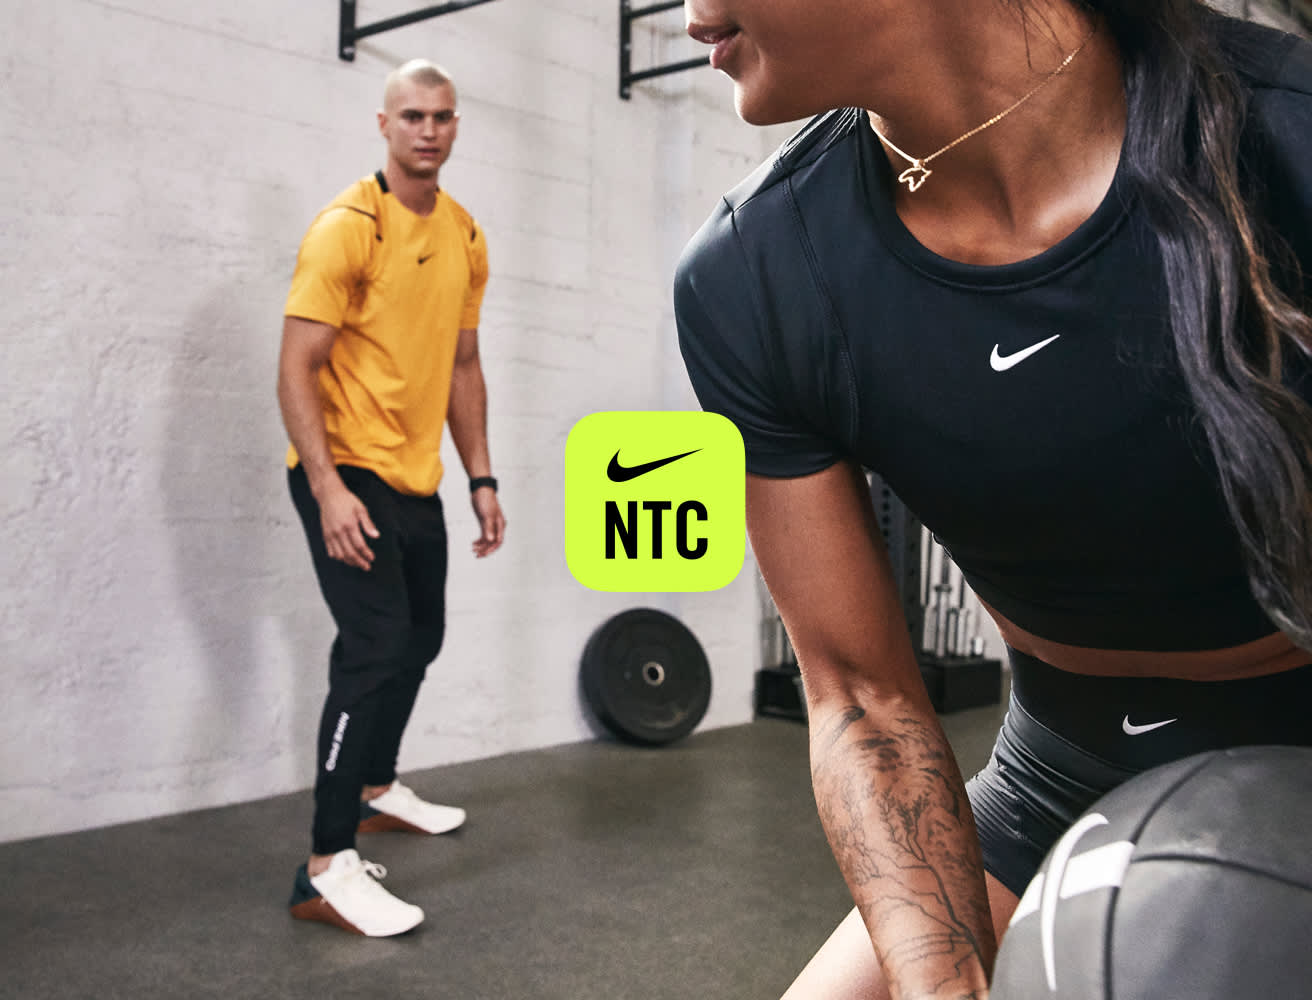 ntc workout in nrc